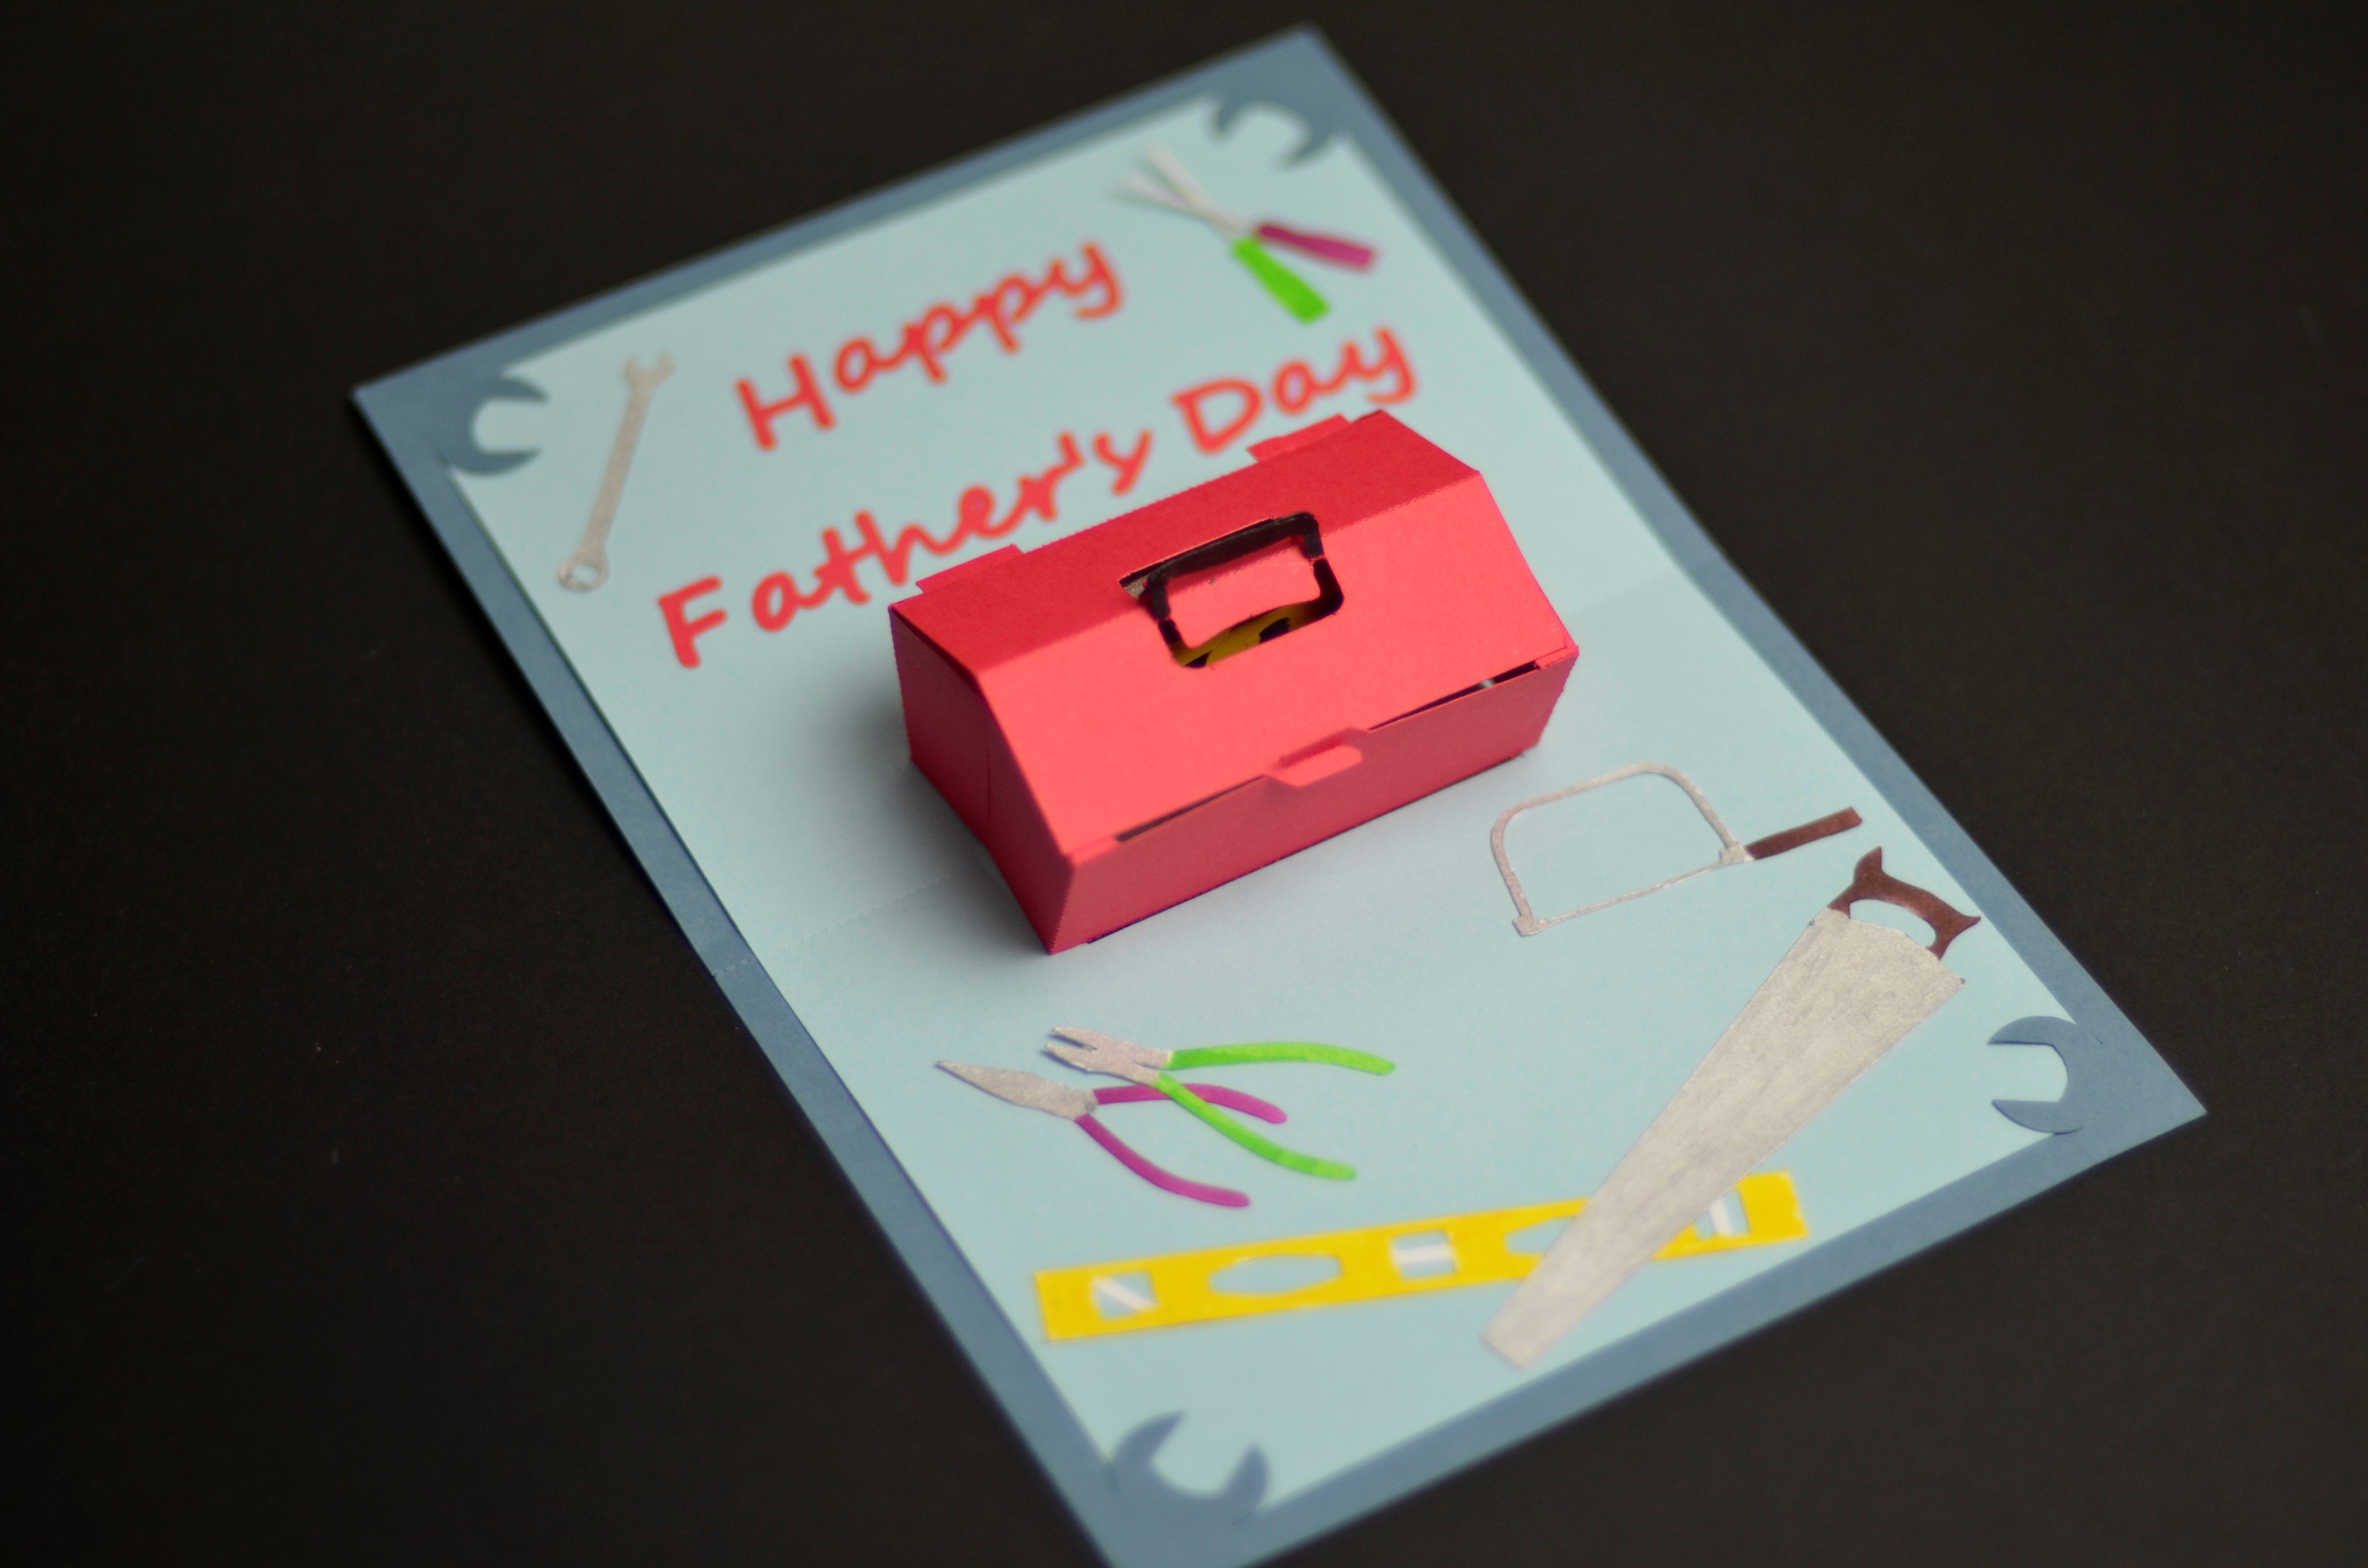 Father's Day Pop Up Card: Tool Box - Creative Pop Up Cards